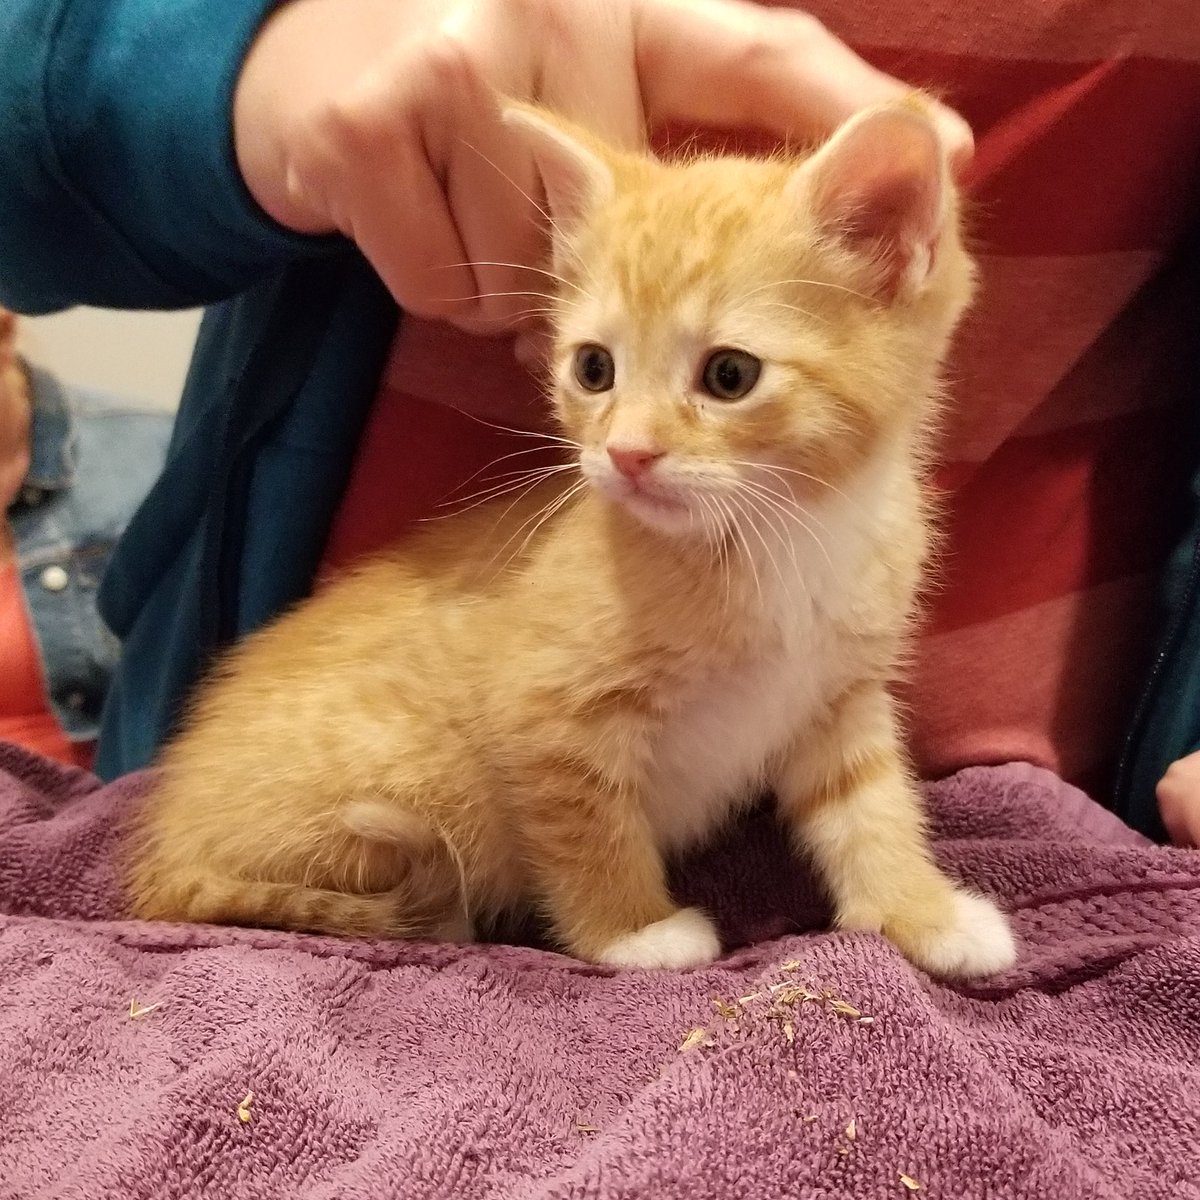 Bagel is SO cute, we could just eat him up! 🥯 All we need is some cream cheese 😻 💕 #SACHlovescats #kitten #kittens #orangekittens #orangecats #bagel #atx #austintx #cutecats #welovecats #catworld #cathospital #catfriendly #catsofaustin #austincats #southaustincathospital